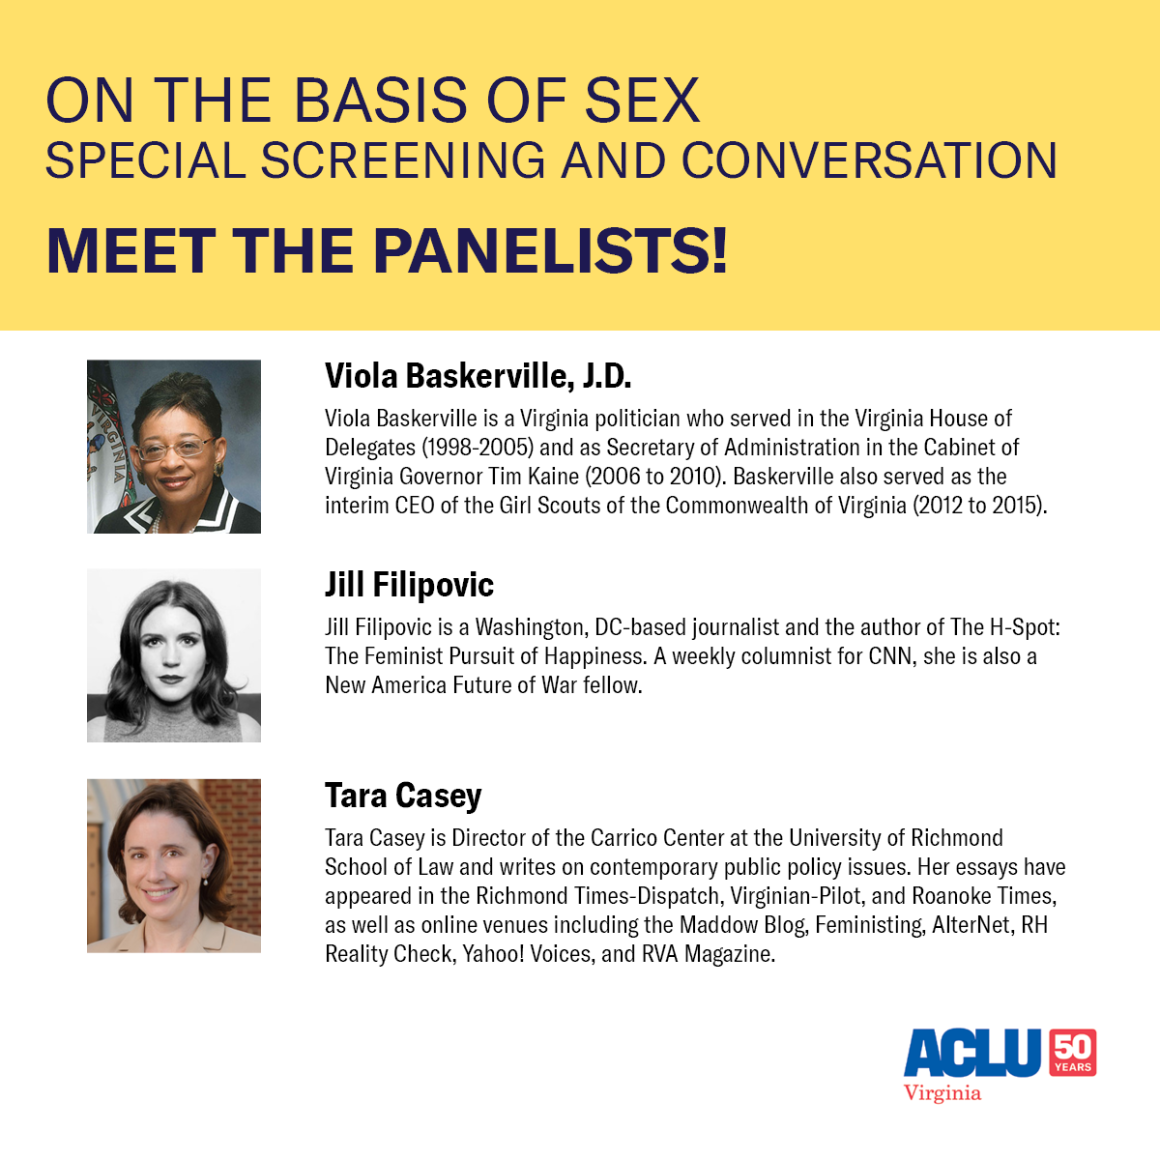 Bios and profile pictures of our panelists for the conversation following On The Basis of Sex movie screening